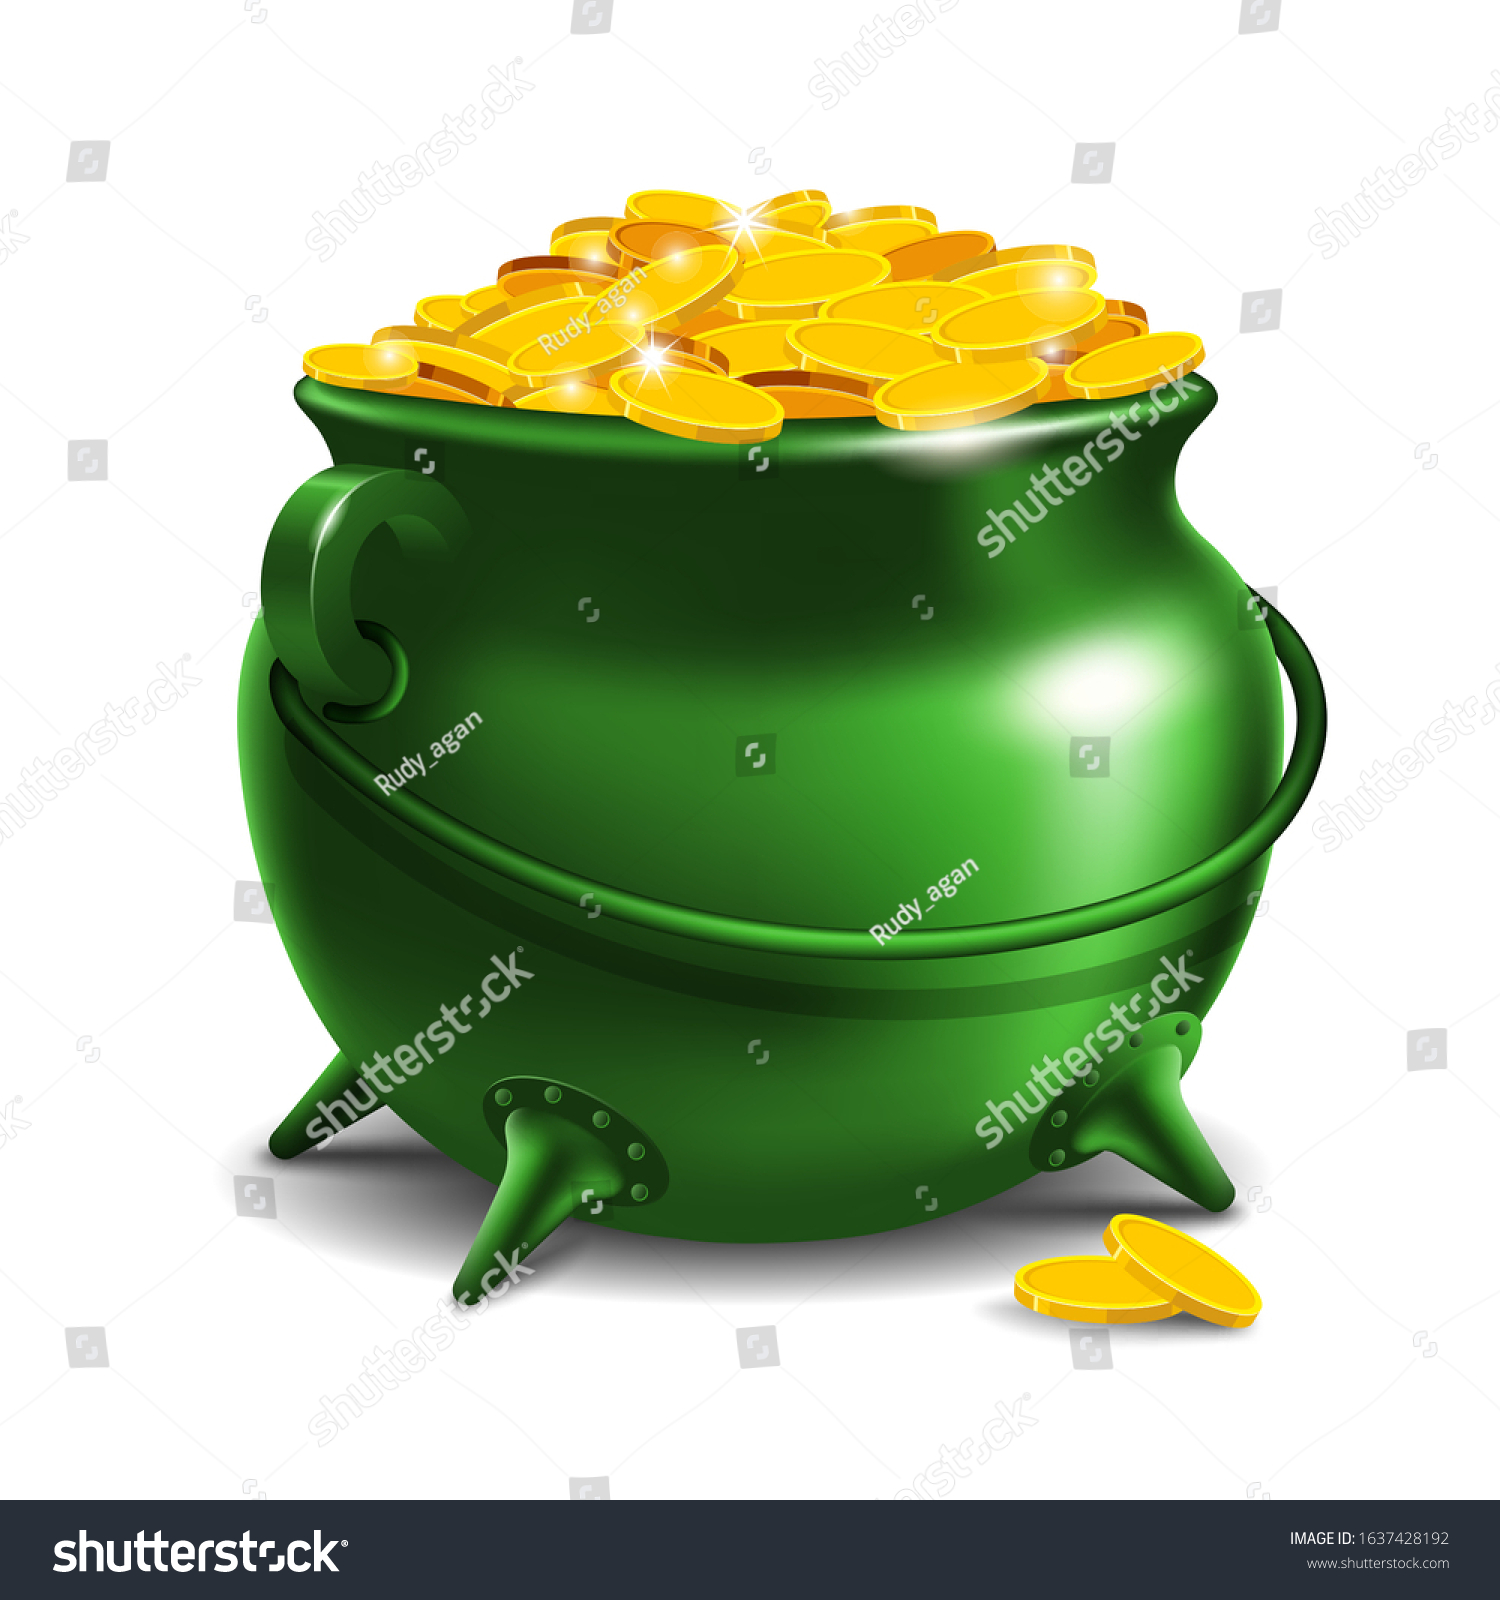 Coin in a jug Illustration, Happy St patrick day. #1637428192